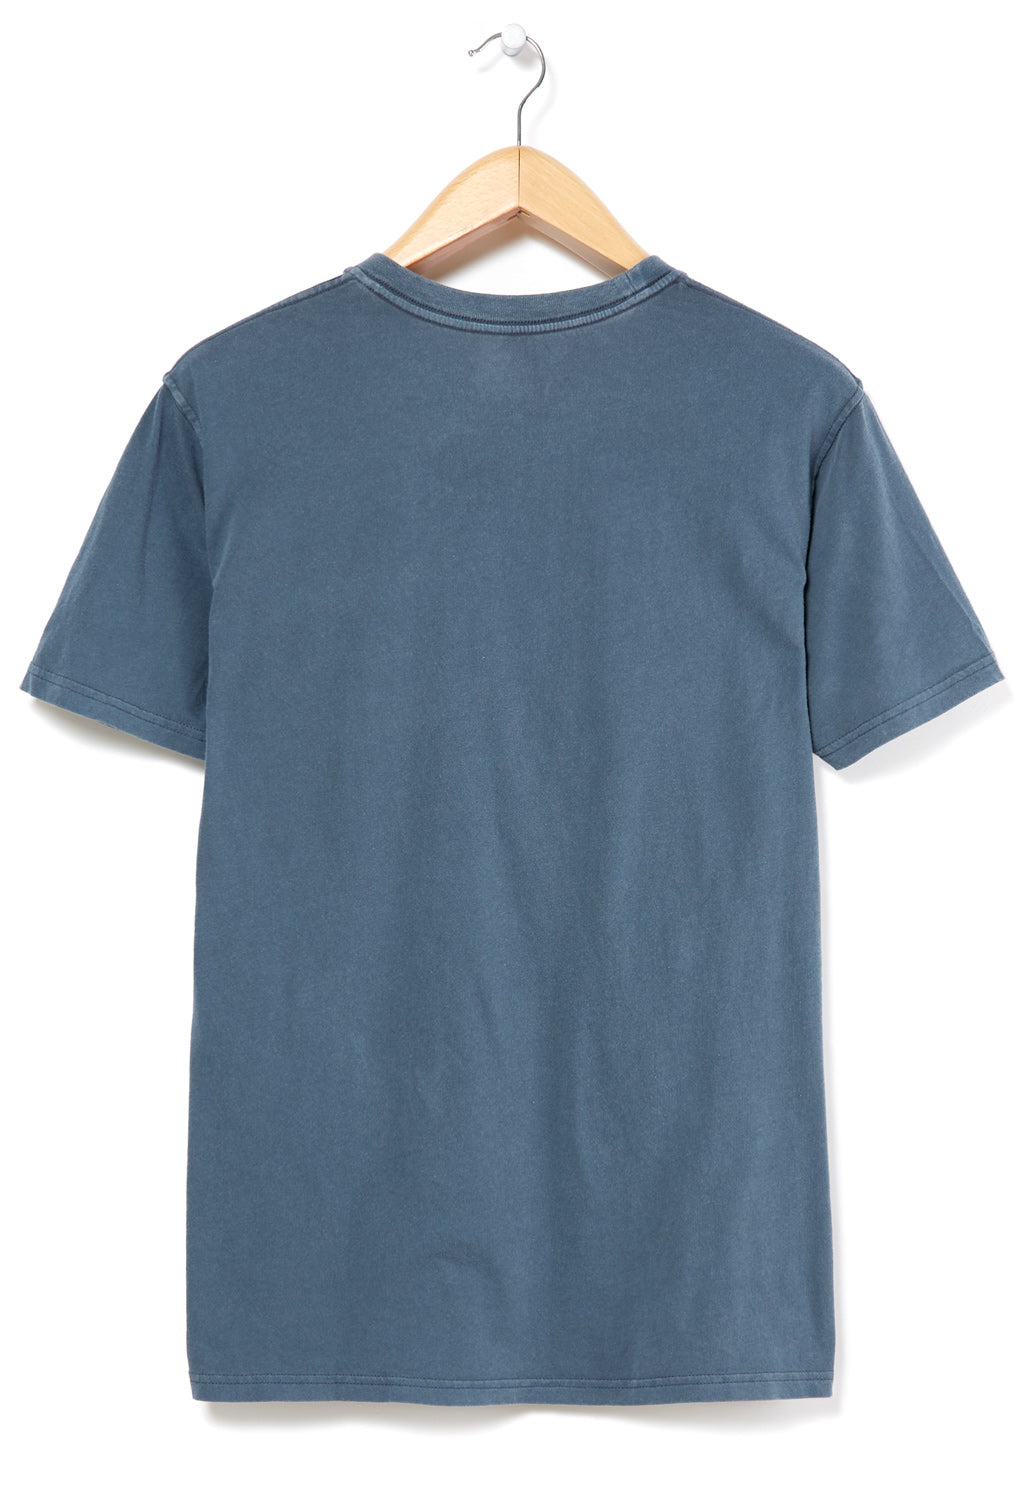 Montbell Men's Wash Out Cotton T-Shirt - Navy